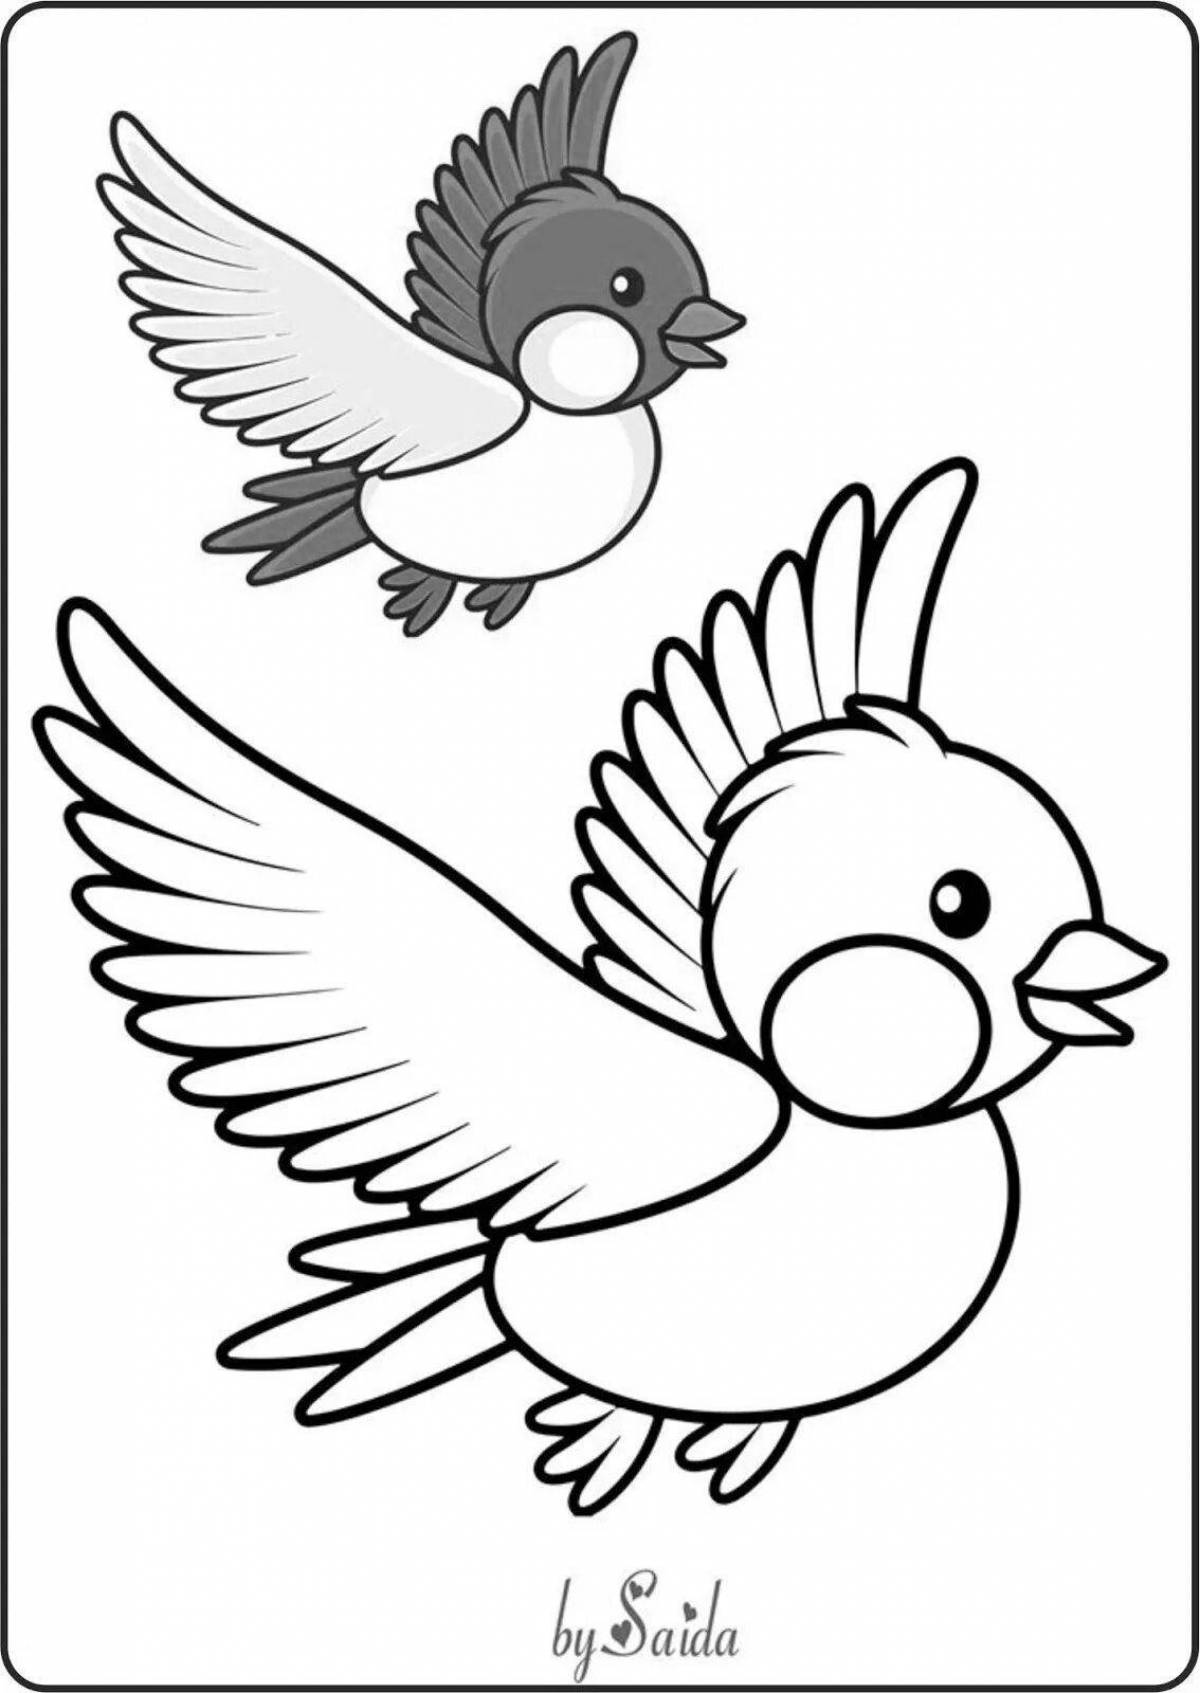 Brilliantly toned sparrow coloring book